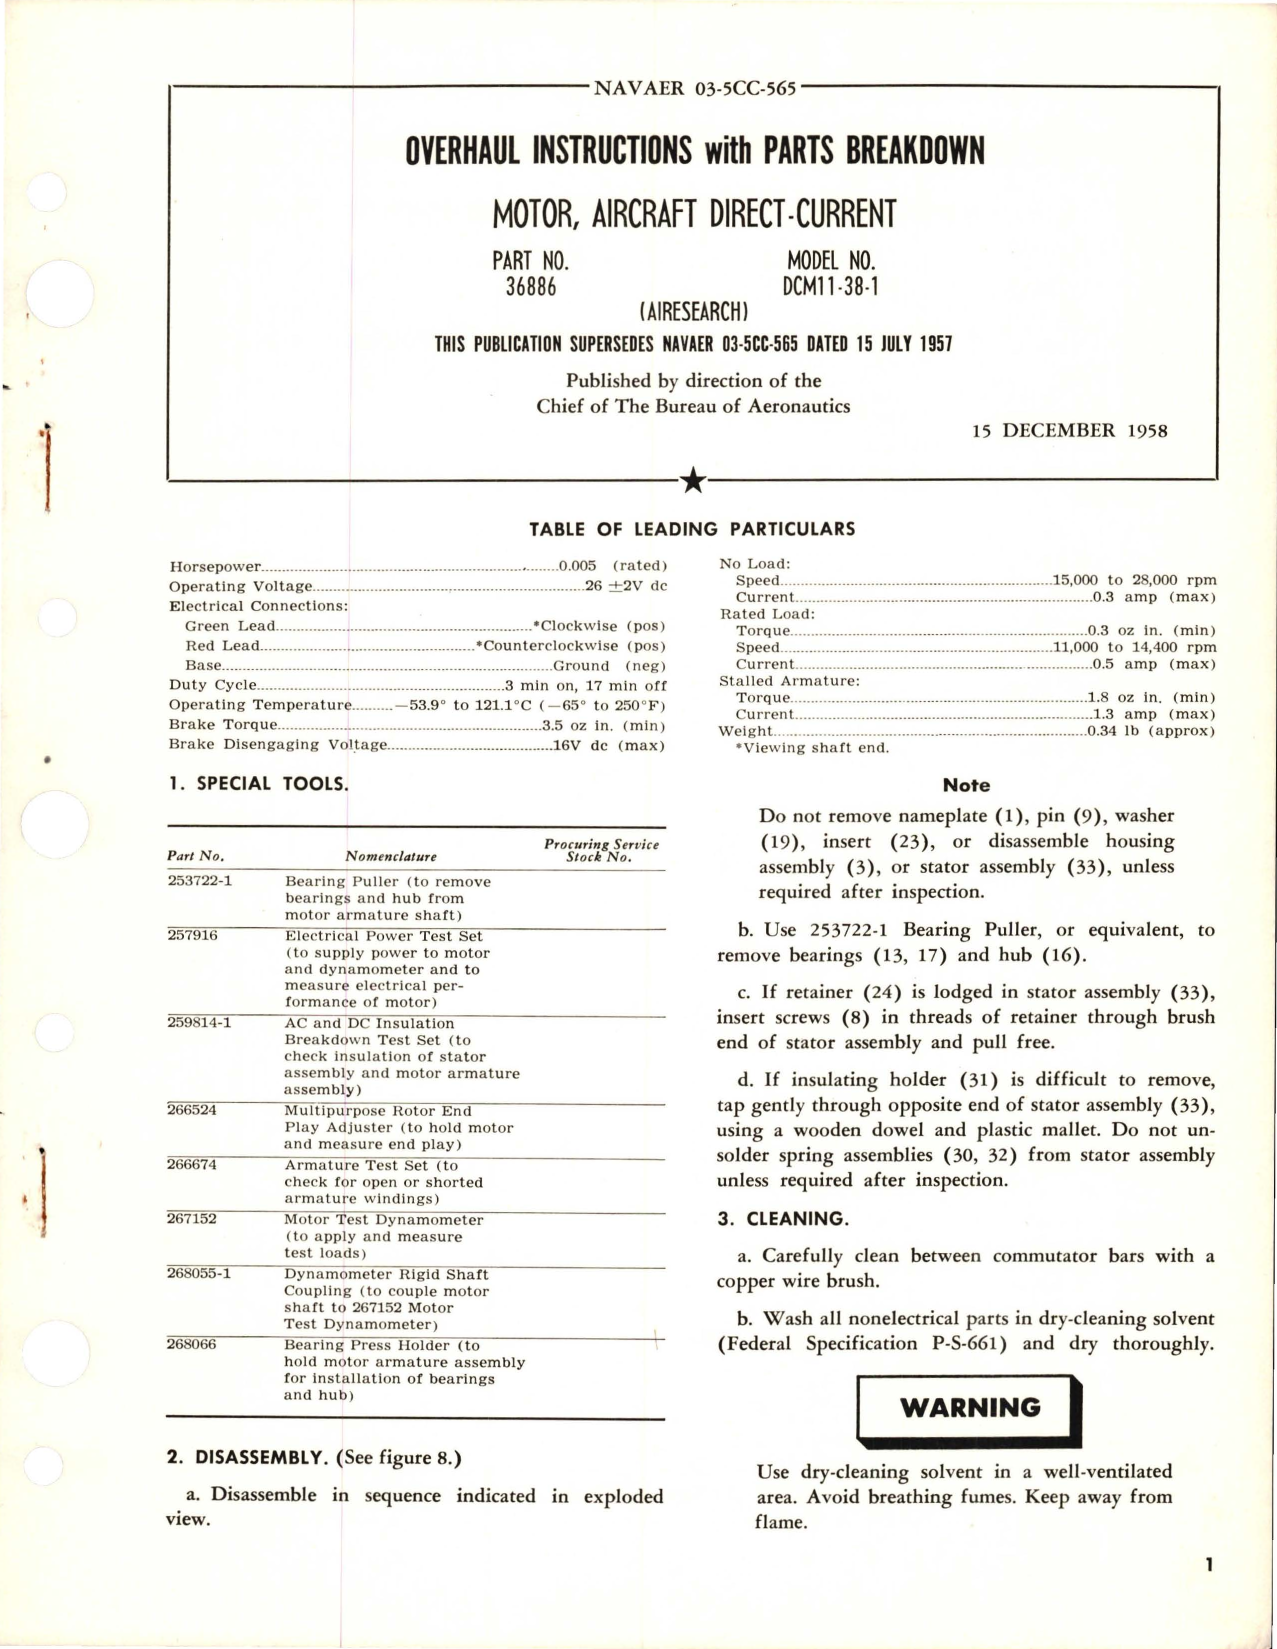 Sample page 1 from AirCorps Library document: Overhaul Instructions with Parts Breakdown for Direct Current Motor - Part 36886 - Model DCM11-38-1